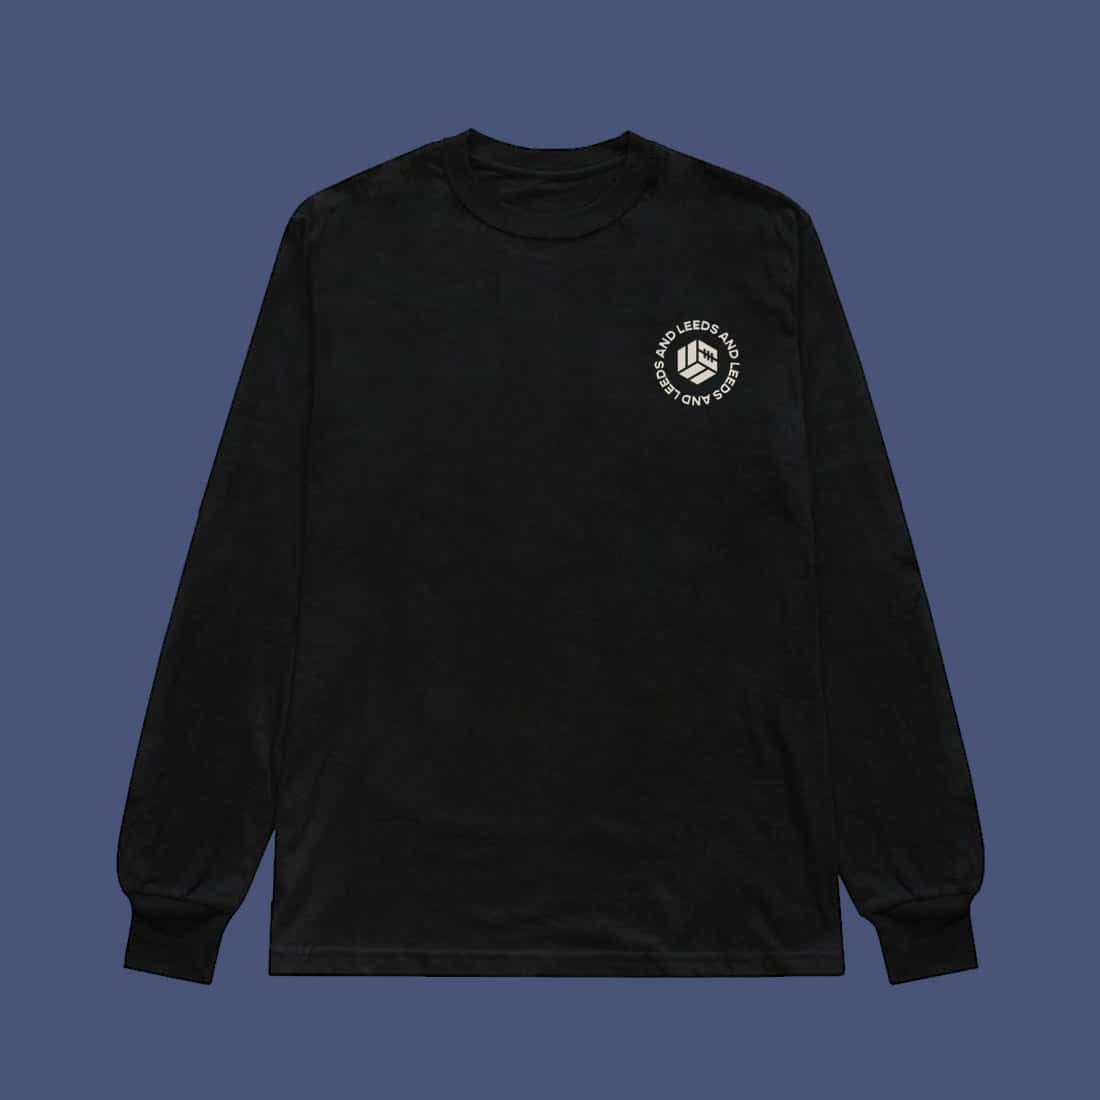 WAFLL long-sleeved t-shirt • The Square Ball